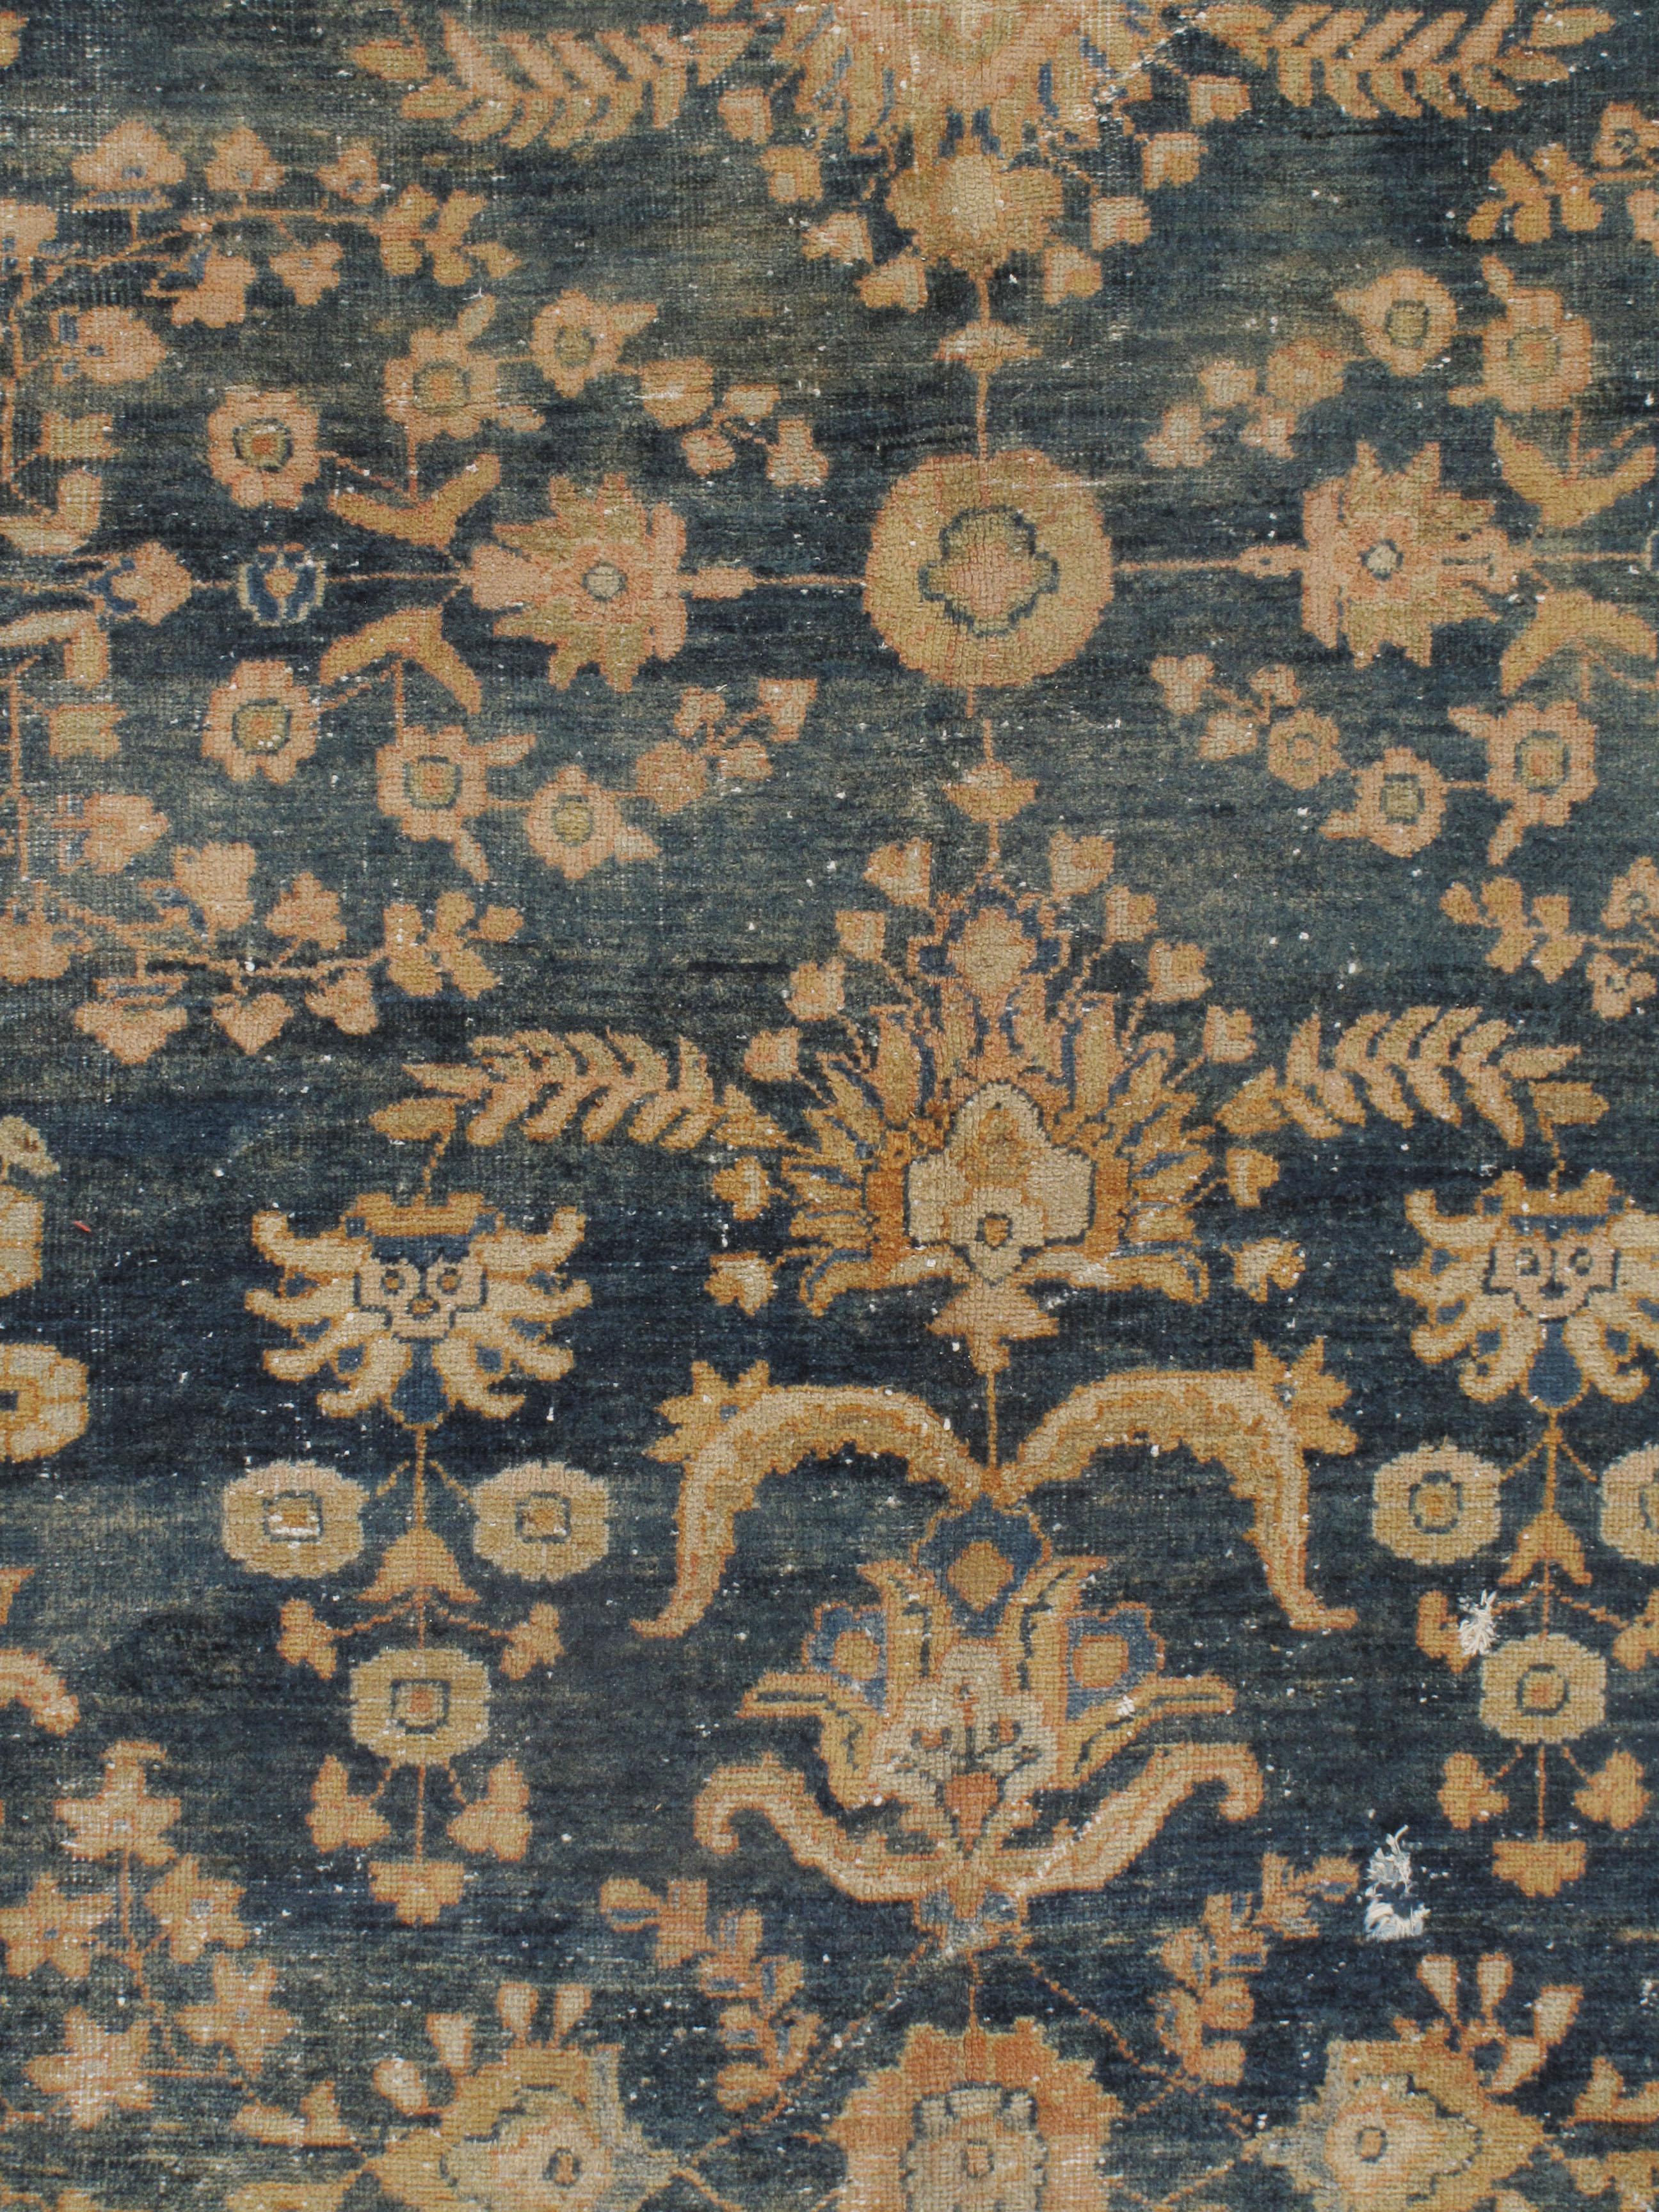 Antique distressed Sultanabad rug. Distressed, shabby chic. The rug is solid but with low pile and a distressed look that adds to its beauty and charm. The rug has a solid foundation and will stand up to the rigors of normal daily use. Size: 8'3 x